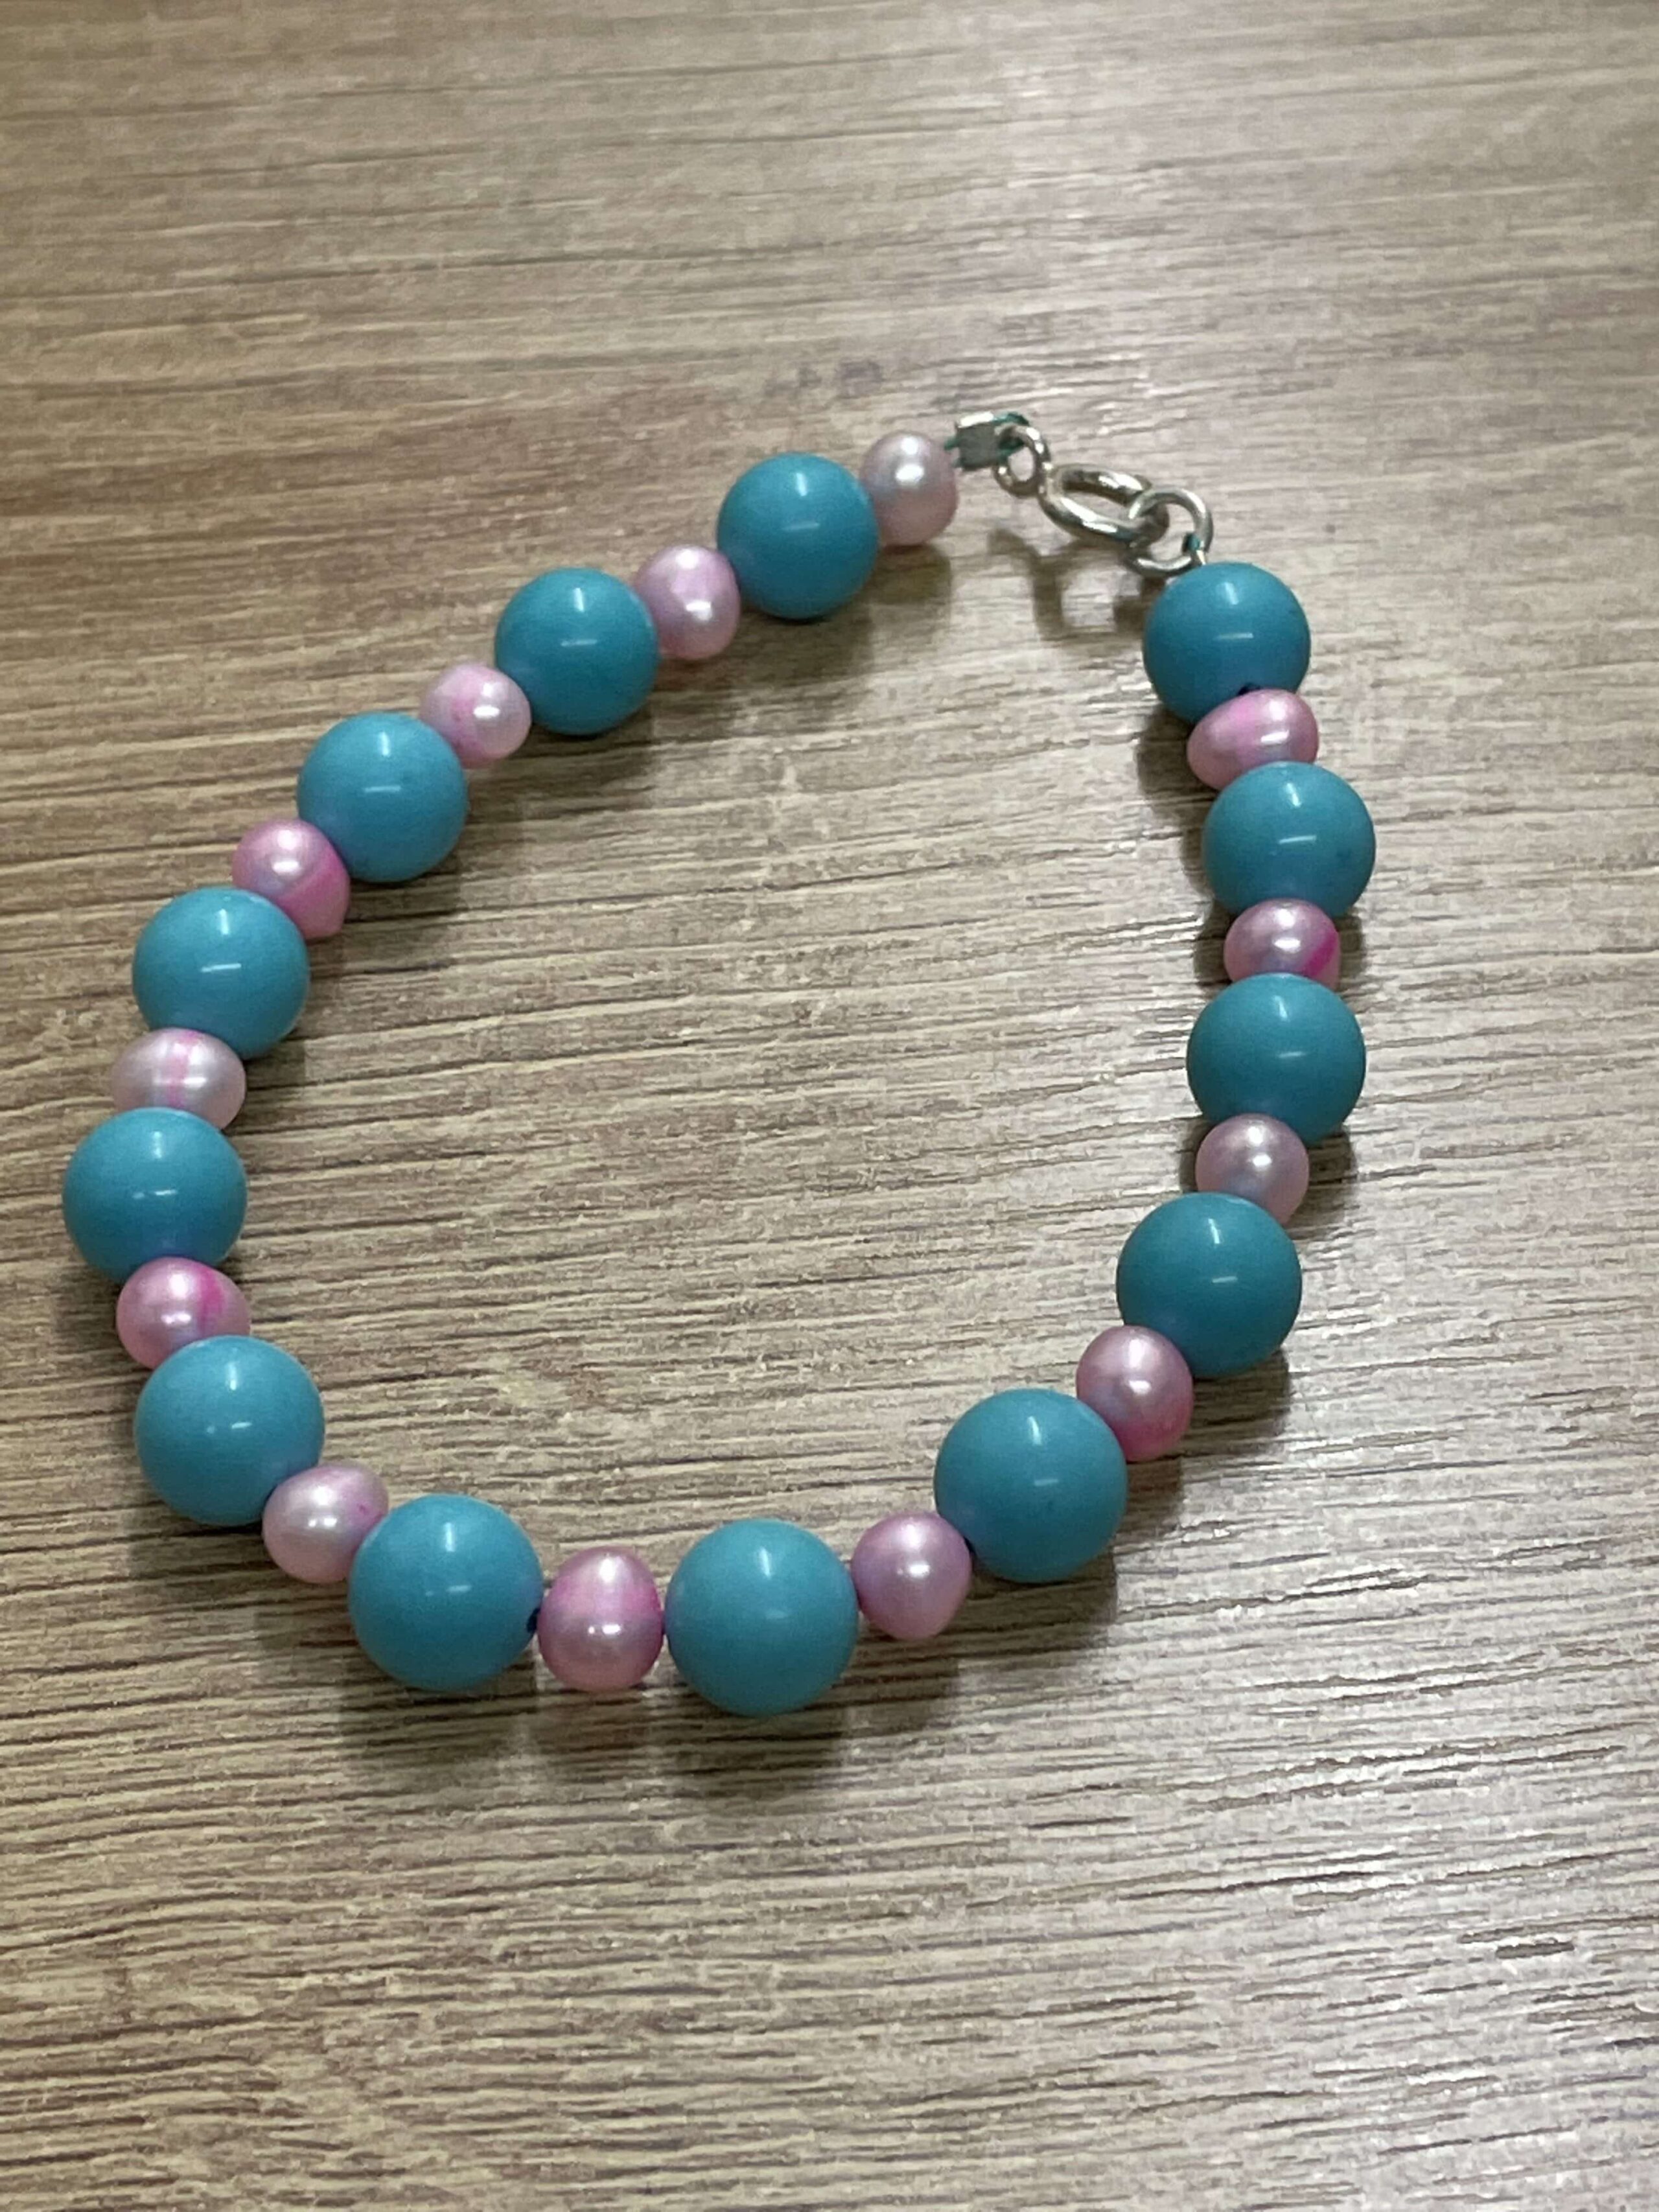 Handmade Turquoise And Pearl Bracelet